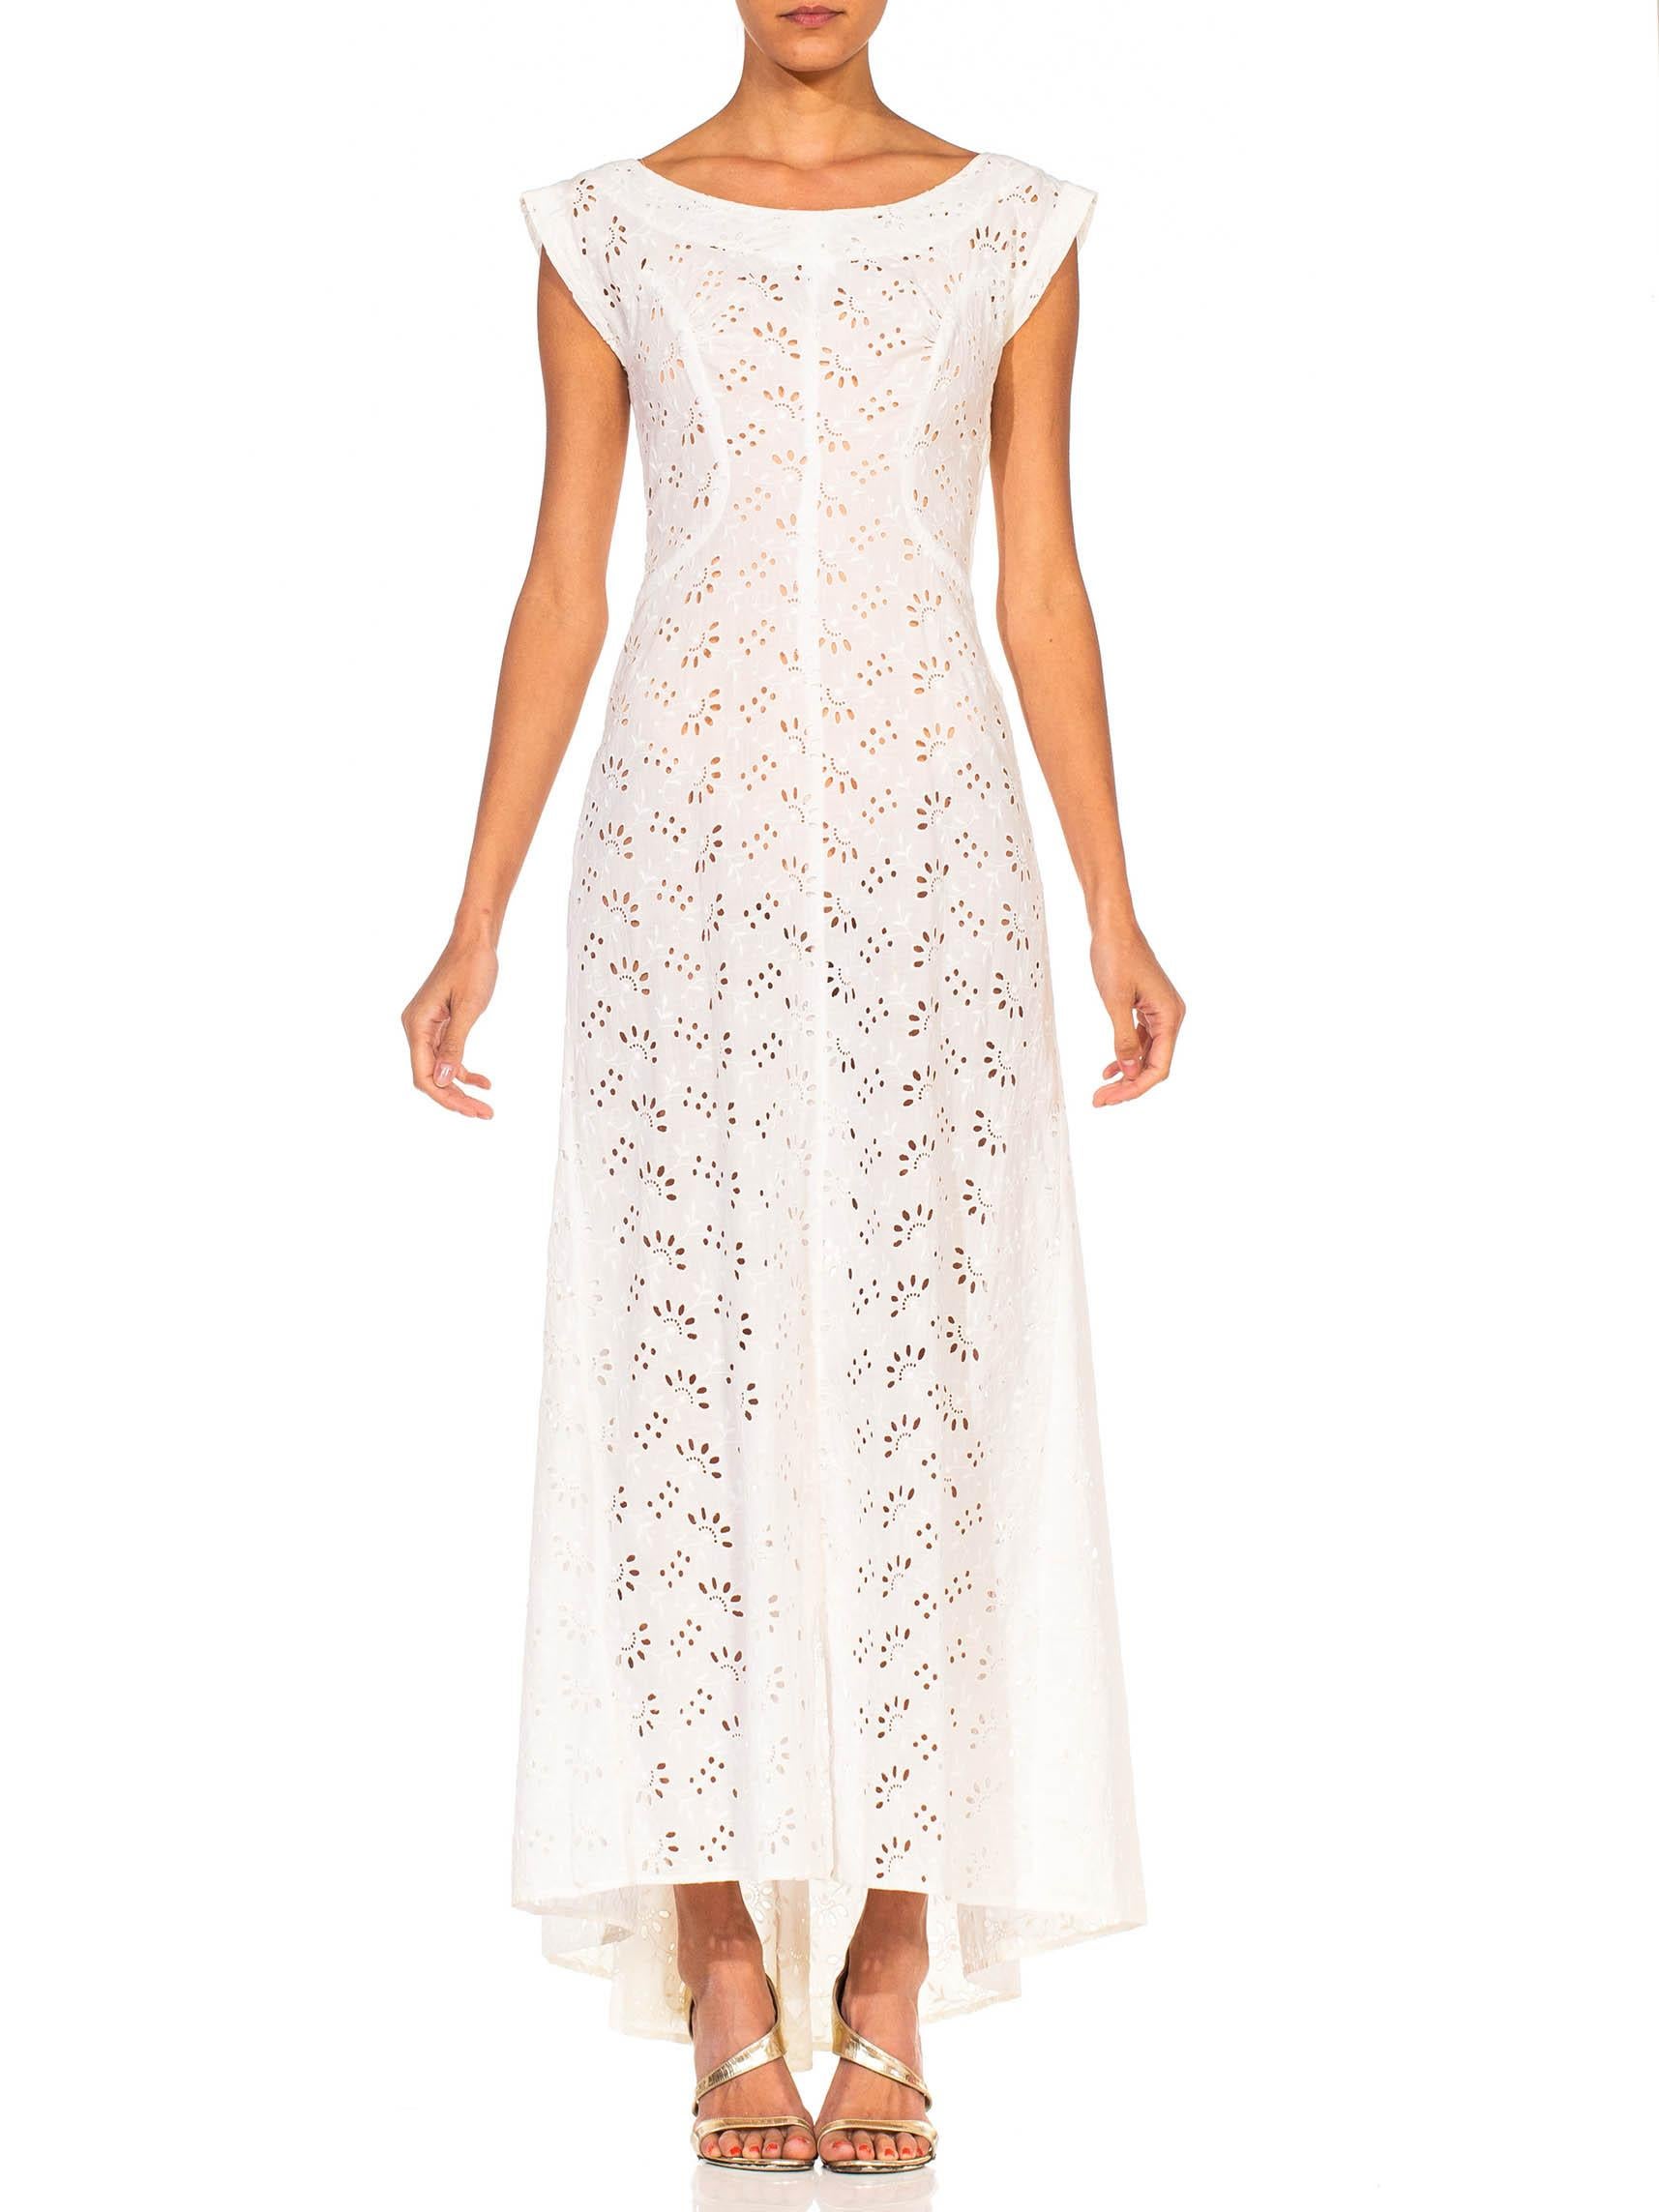 1930S White Cotton Eyelet Lace Summer Lawn Party Dress With Mini Bustle For Sale 6